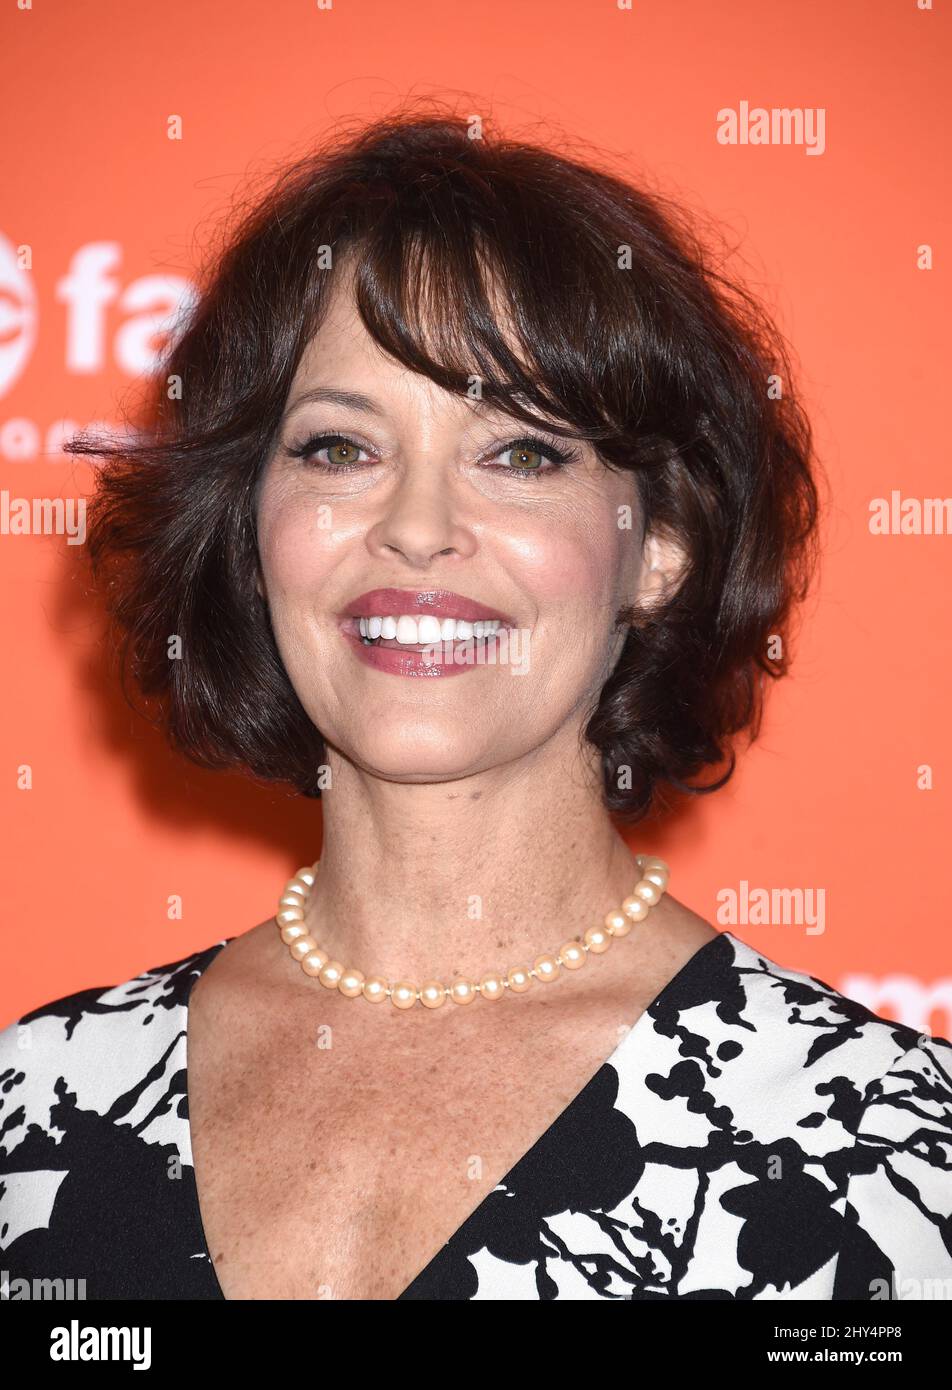 Mary Page Keller attending the ABC TCA Press Tour 2014 held at the Beverly Hilton Hotel Stock Photo